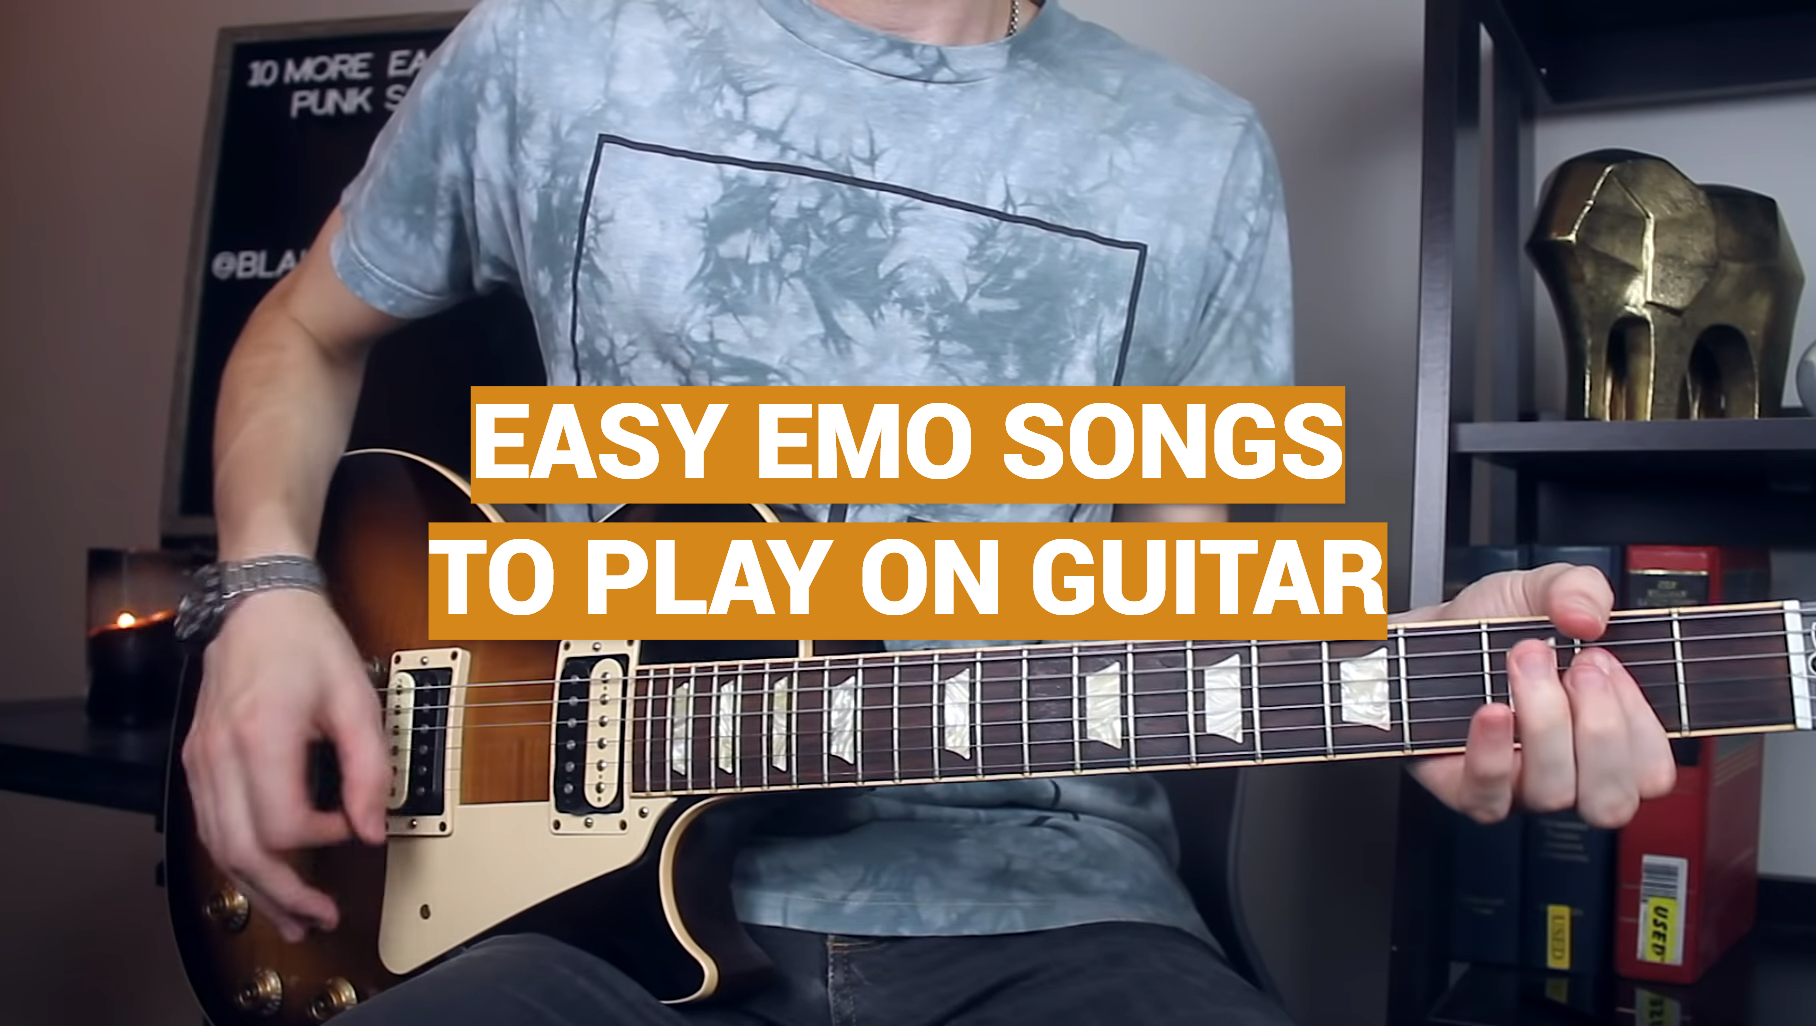 Easy Emo Songs to Play on Guitar